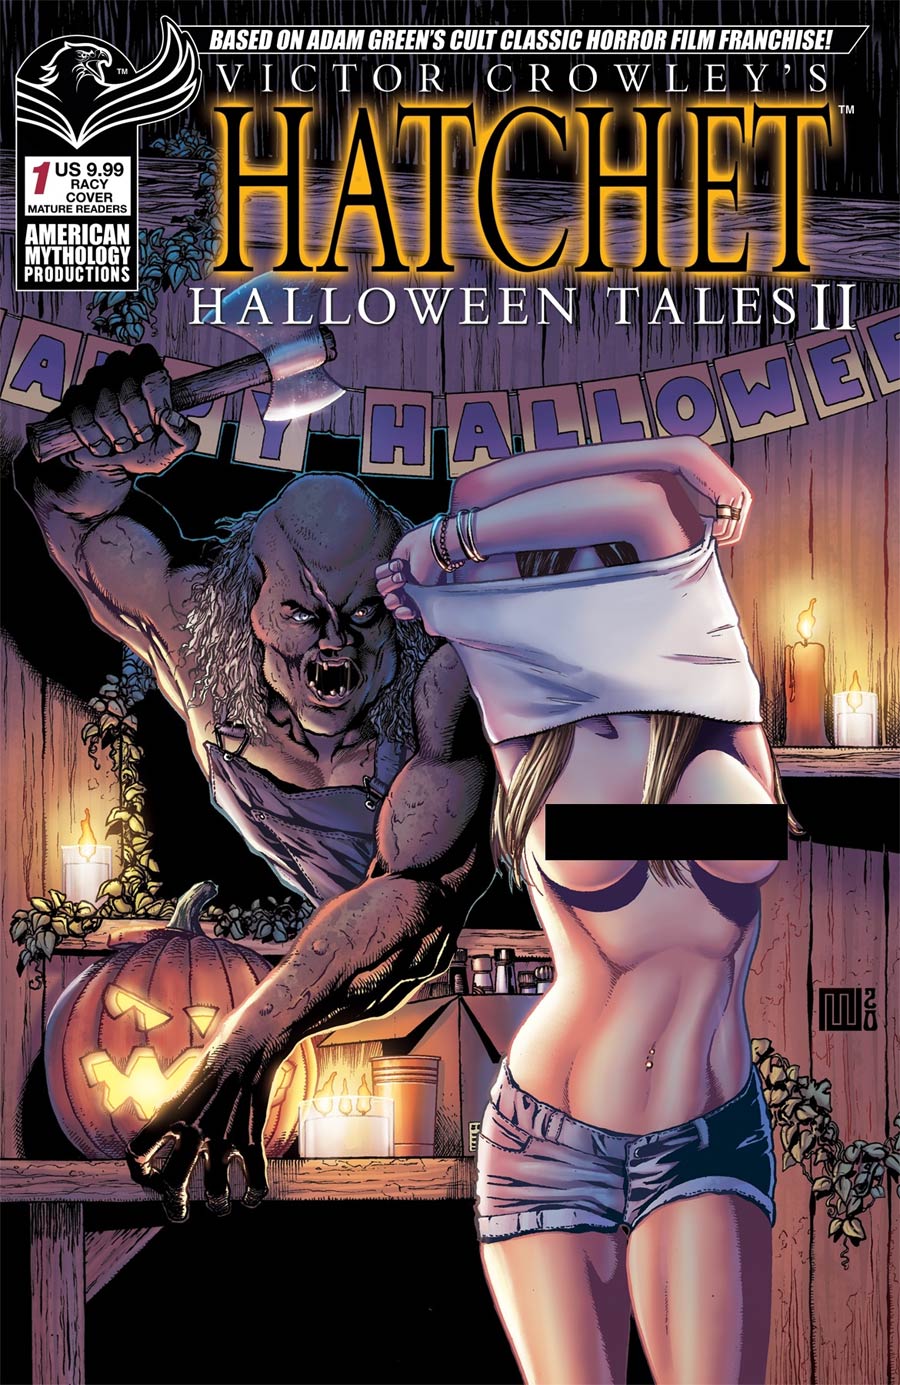 Victor Crowleys Hatchet Halloween Tales II Cover C Variant Mike Wolfer Racy Cover